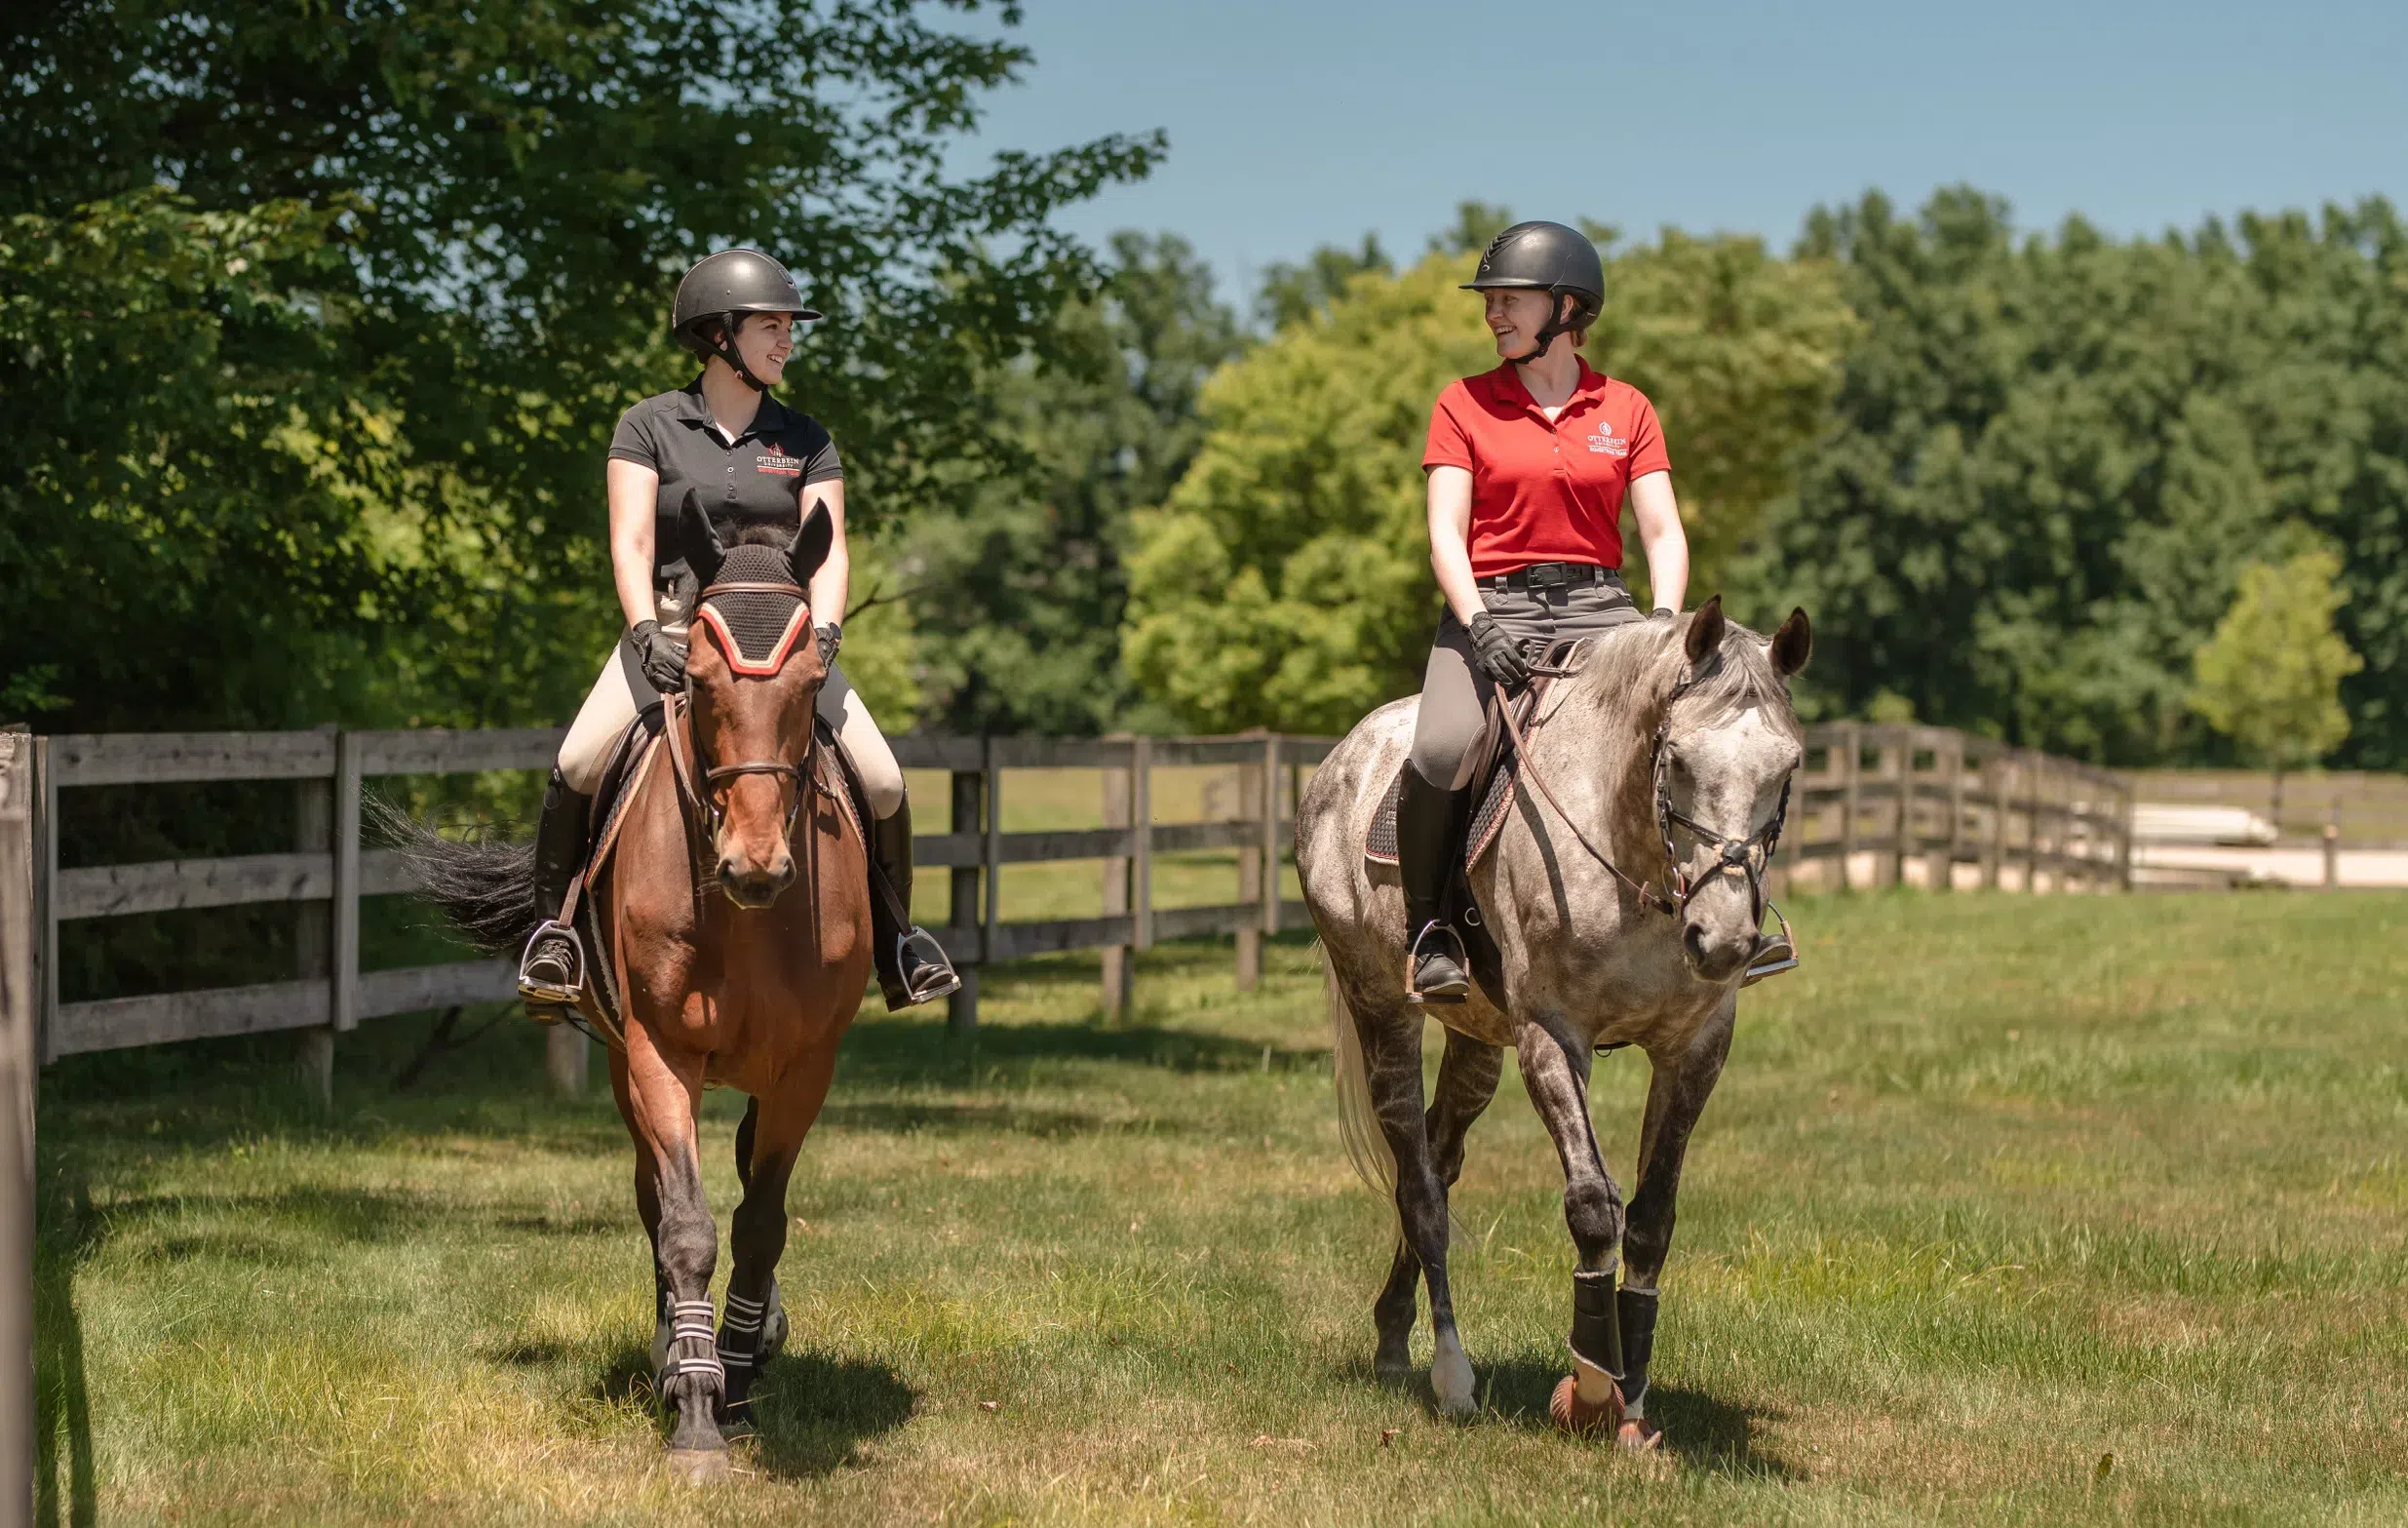 Two riders at Otterbein's Outdoor Arena